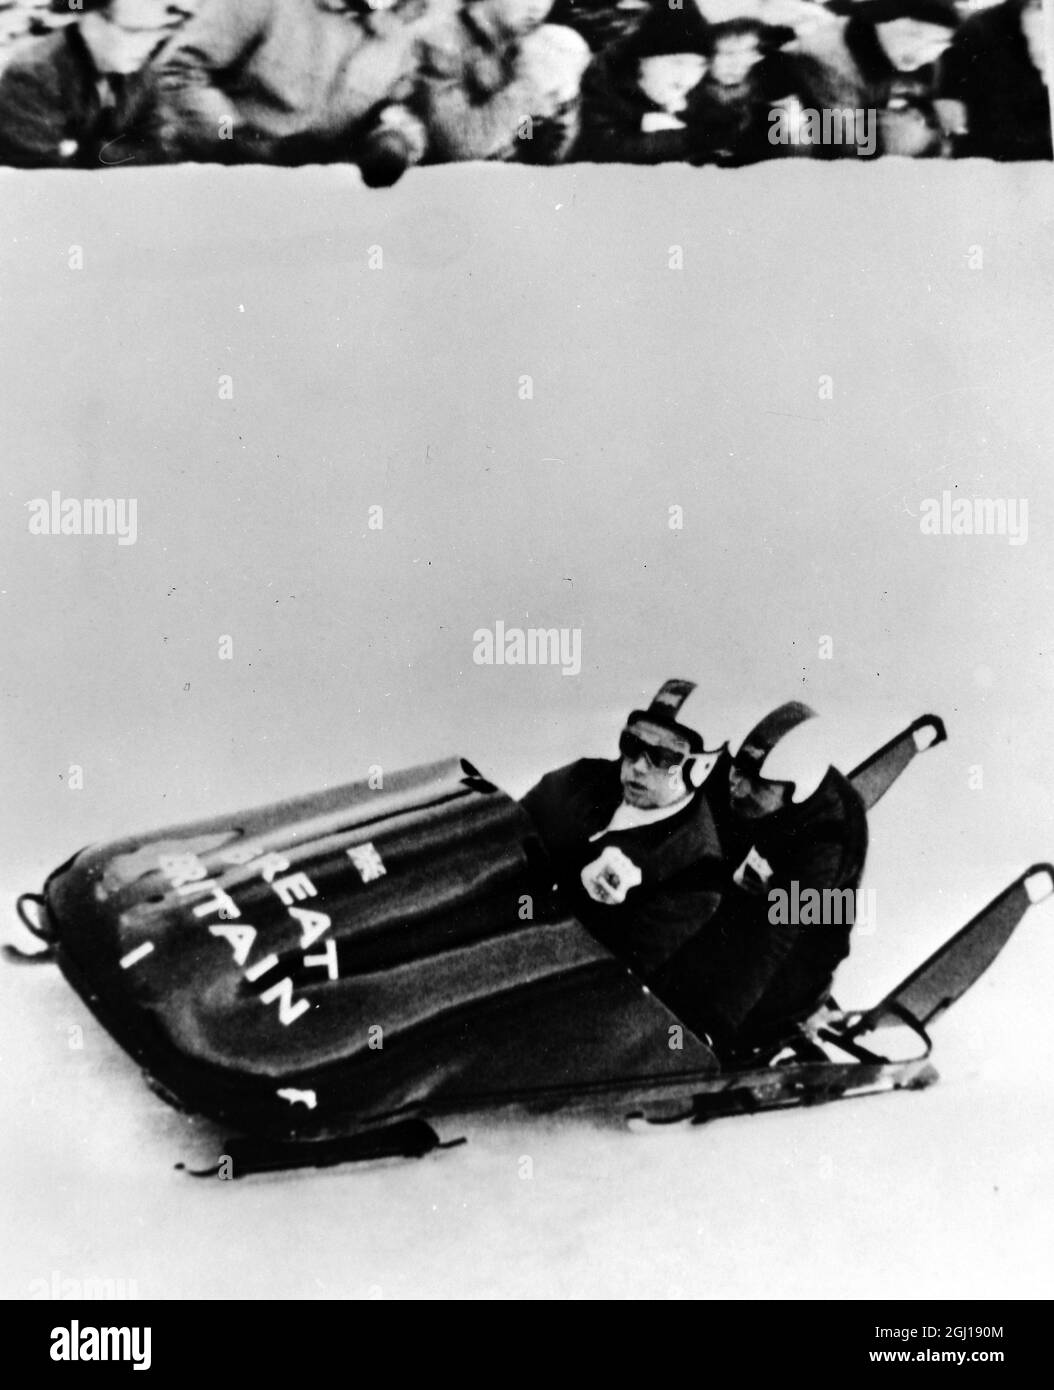 1 FEBRUARY 1964 ANTHONY NASH AND ROBIN DIXON ON THEIR WAY TO WIN THE GOLD MEDAL IN THE 2 MAN BOBSLEIGH, THE FIRST TIME BRITAIN HAS WON GOLD IN THE WINTER OLYMPICS SINCE 1952. IGLS, INNSBRUCK, AUSTRIA Stock Photo